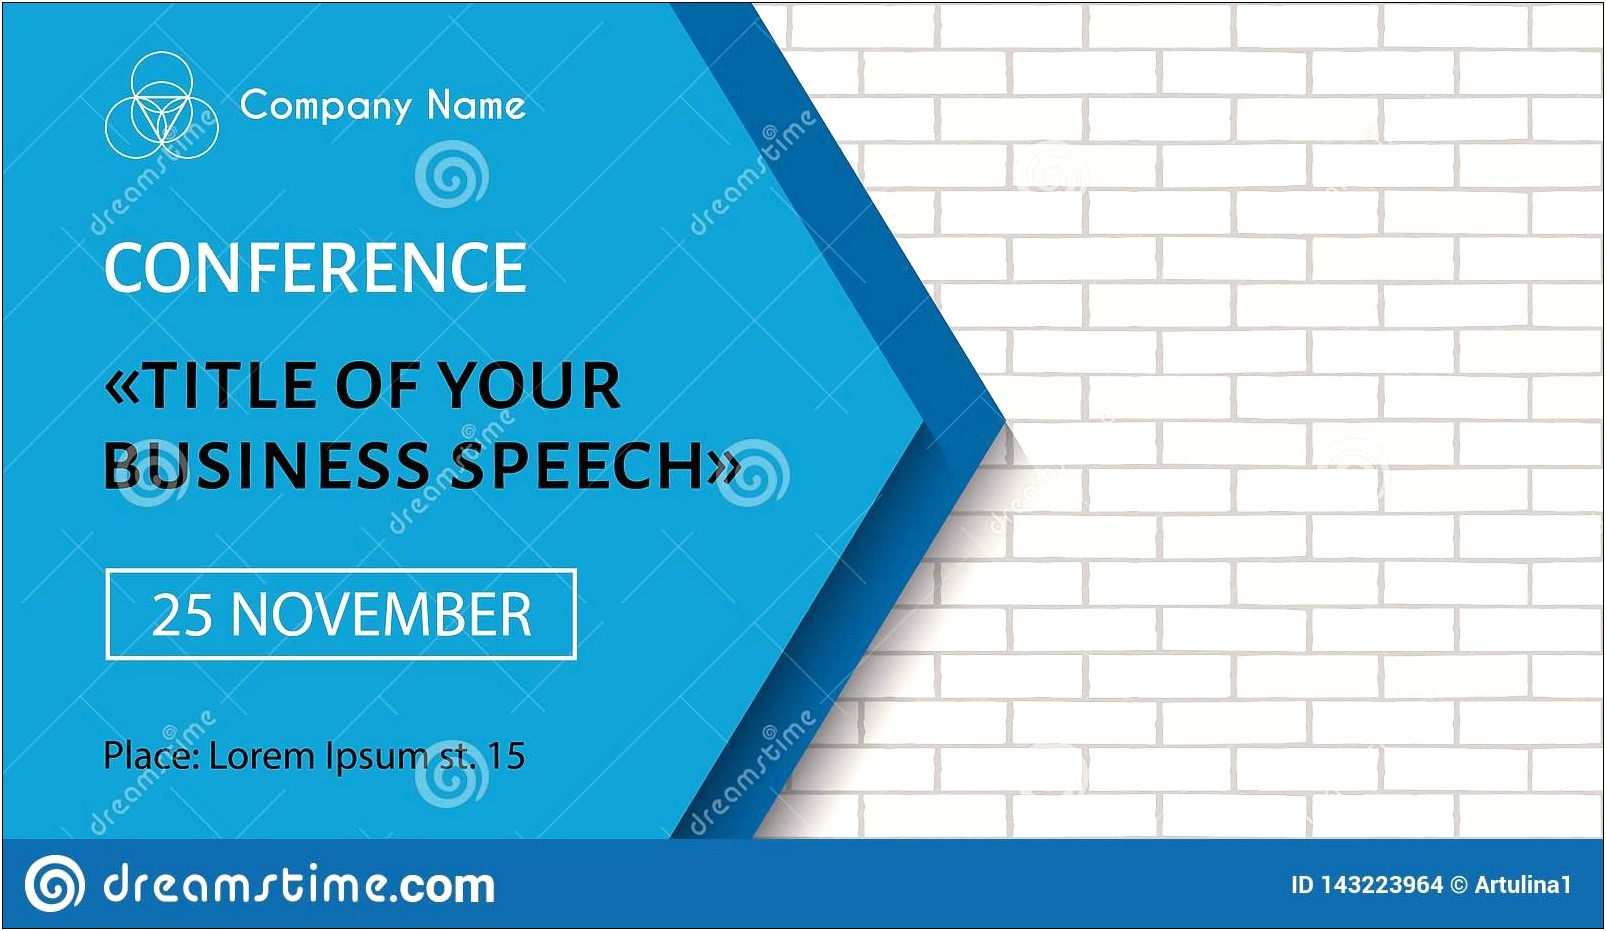 Business Conference Schedule Template Free Download